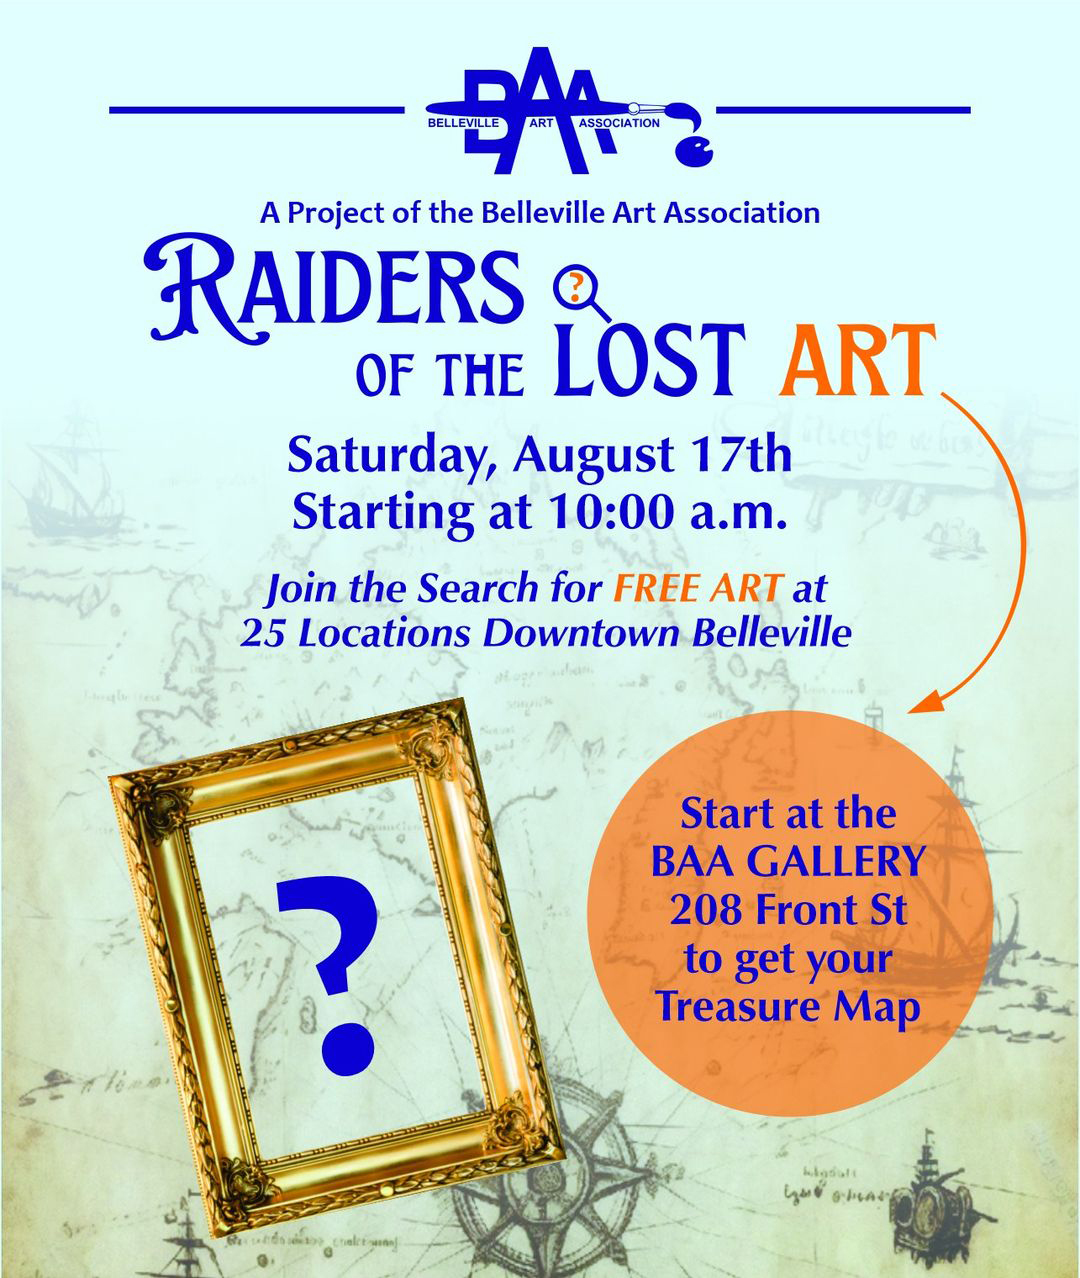 Poster titled "Raiders of the Lost Art" with event info